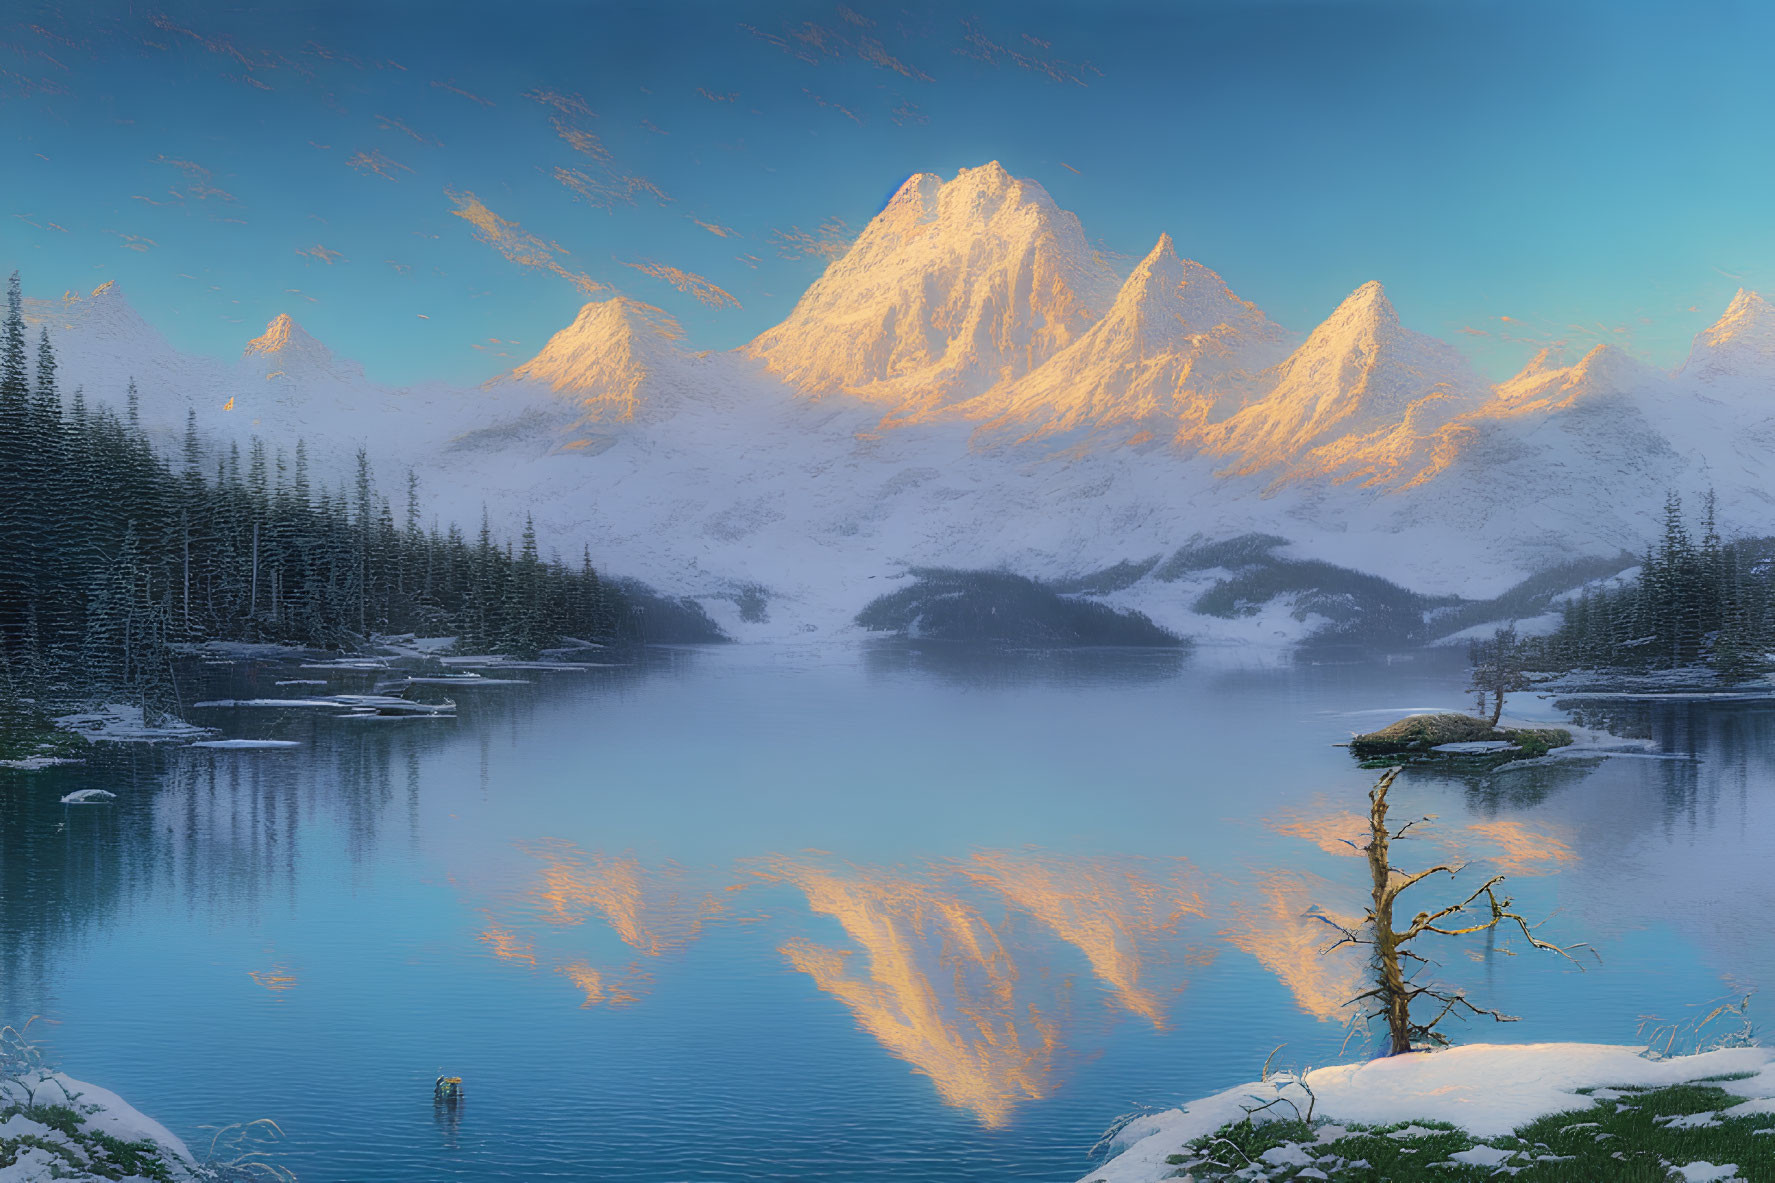 Snow-capped alpine peaks in golden sunlight by a serene lake